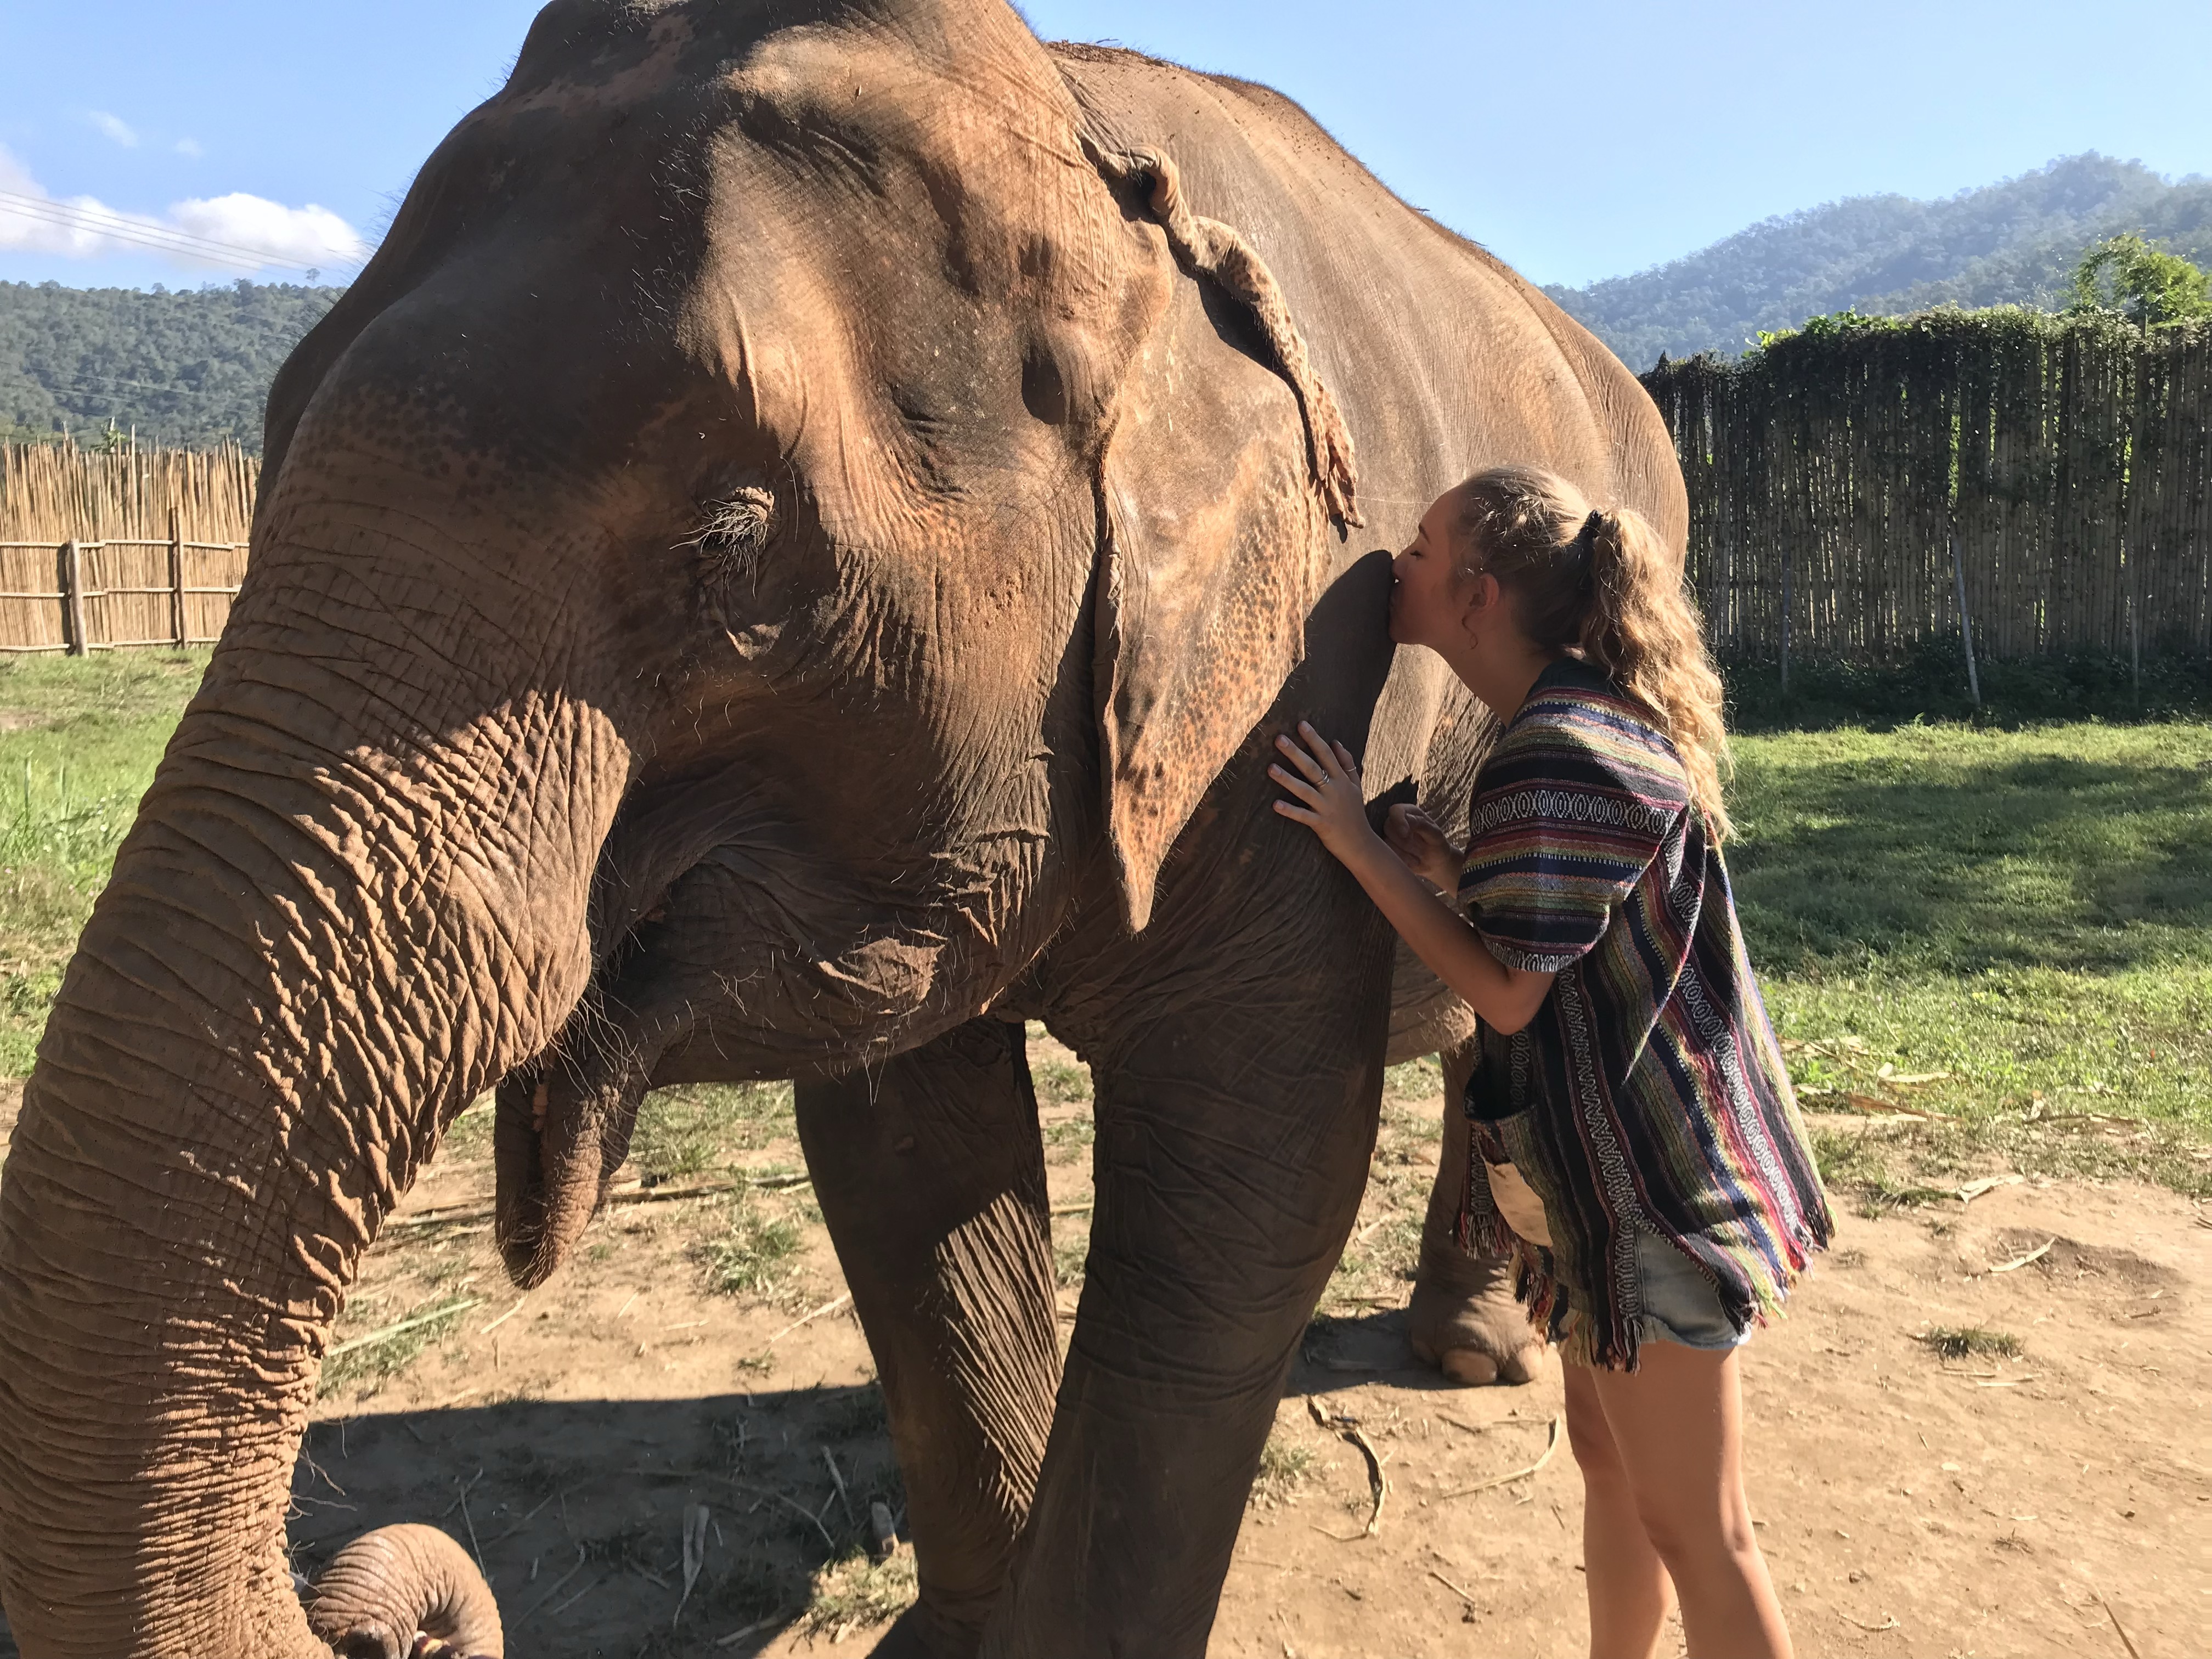 Eco-tourism Author Chelsea Wiersma with elephant friend at a reserve.